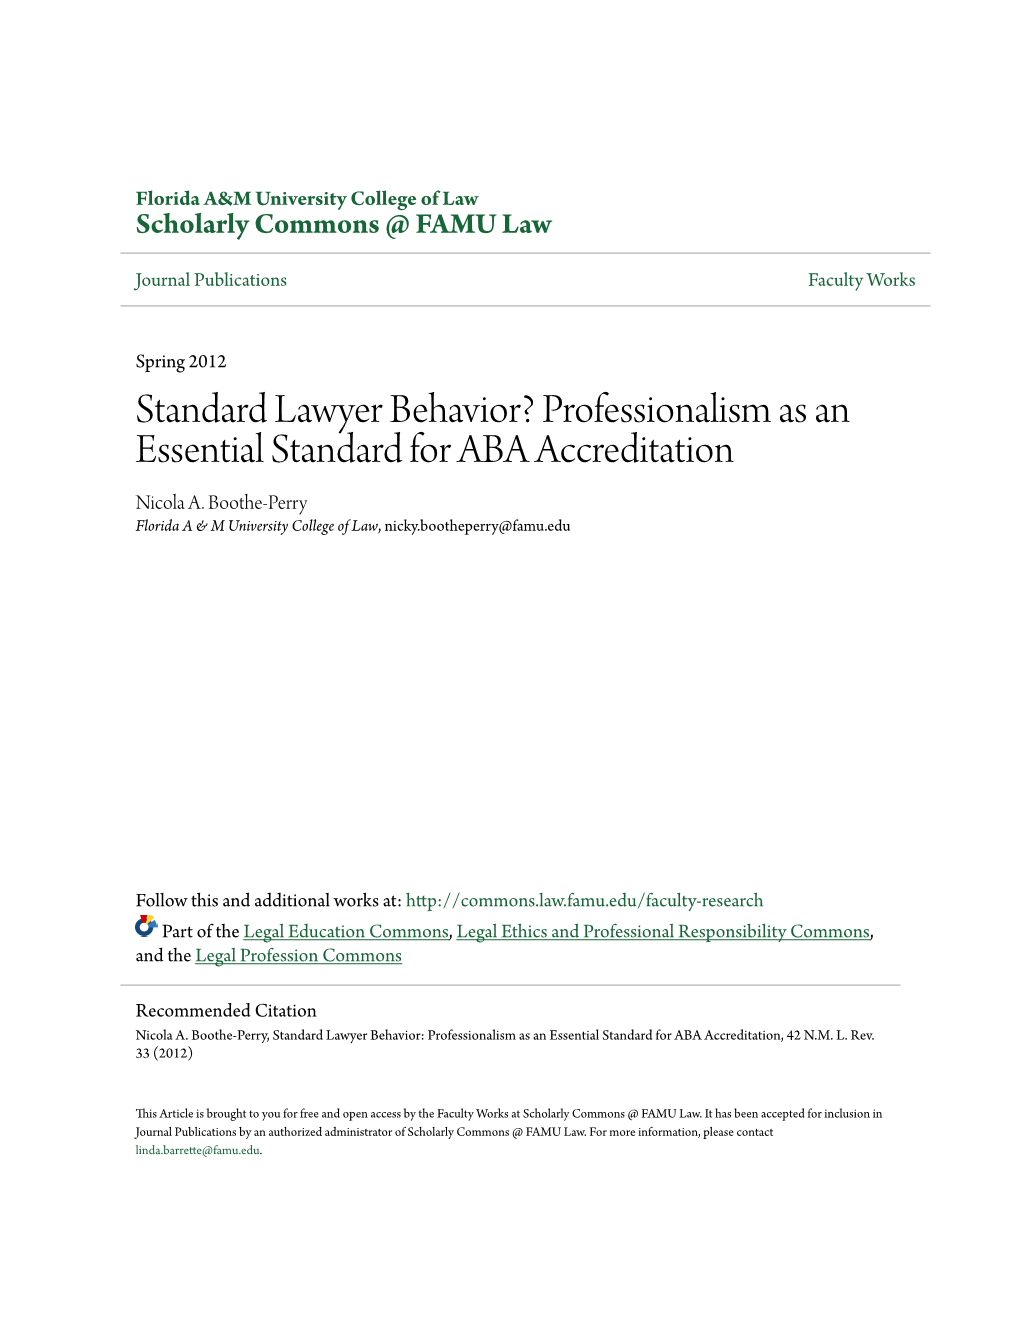 Standard Lawyer Behavior? Professionalism As an Essential Standard for ABA Accreditation Nicola A